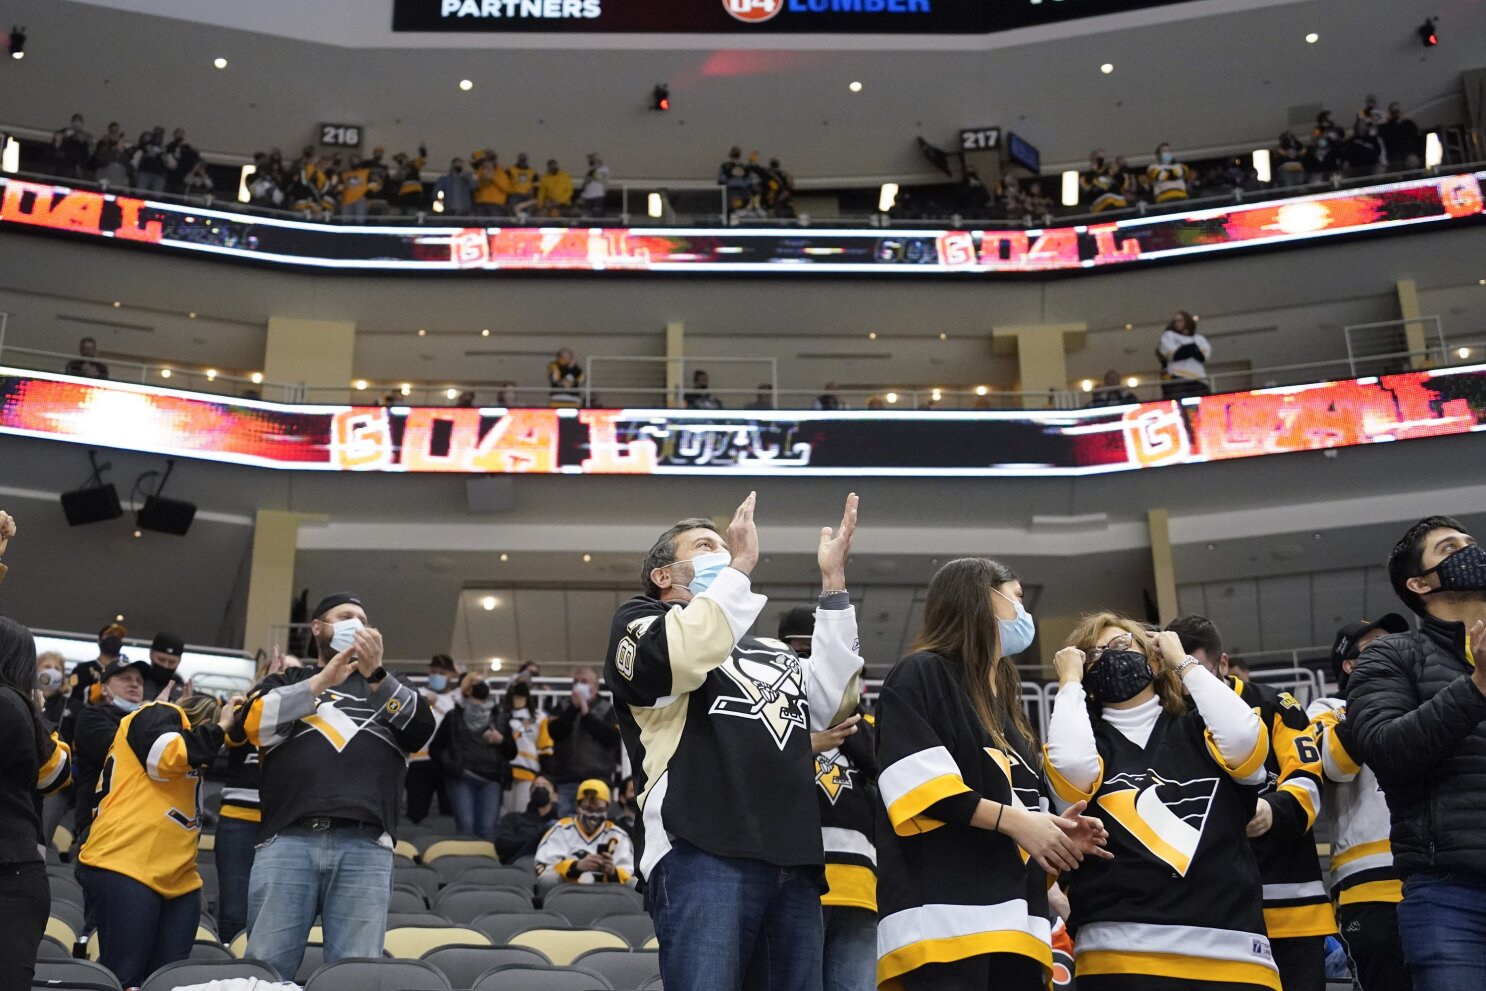 Kapanen scores twice; Pens welcome back fans with 5-2 win - The